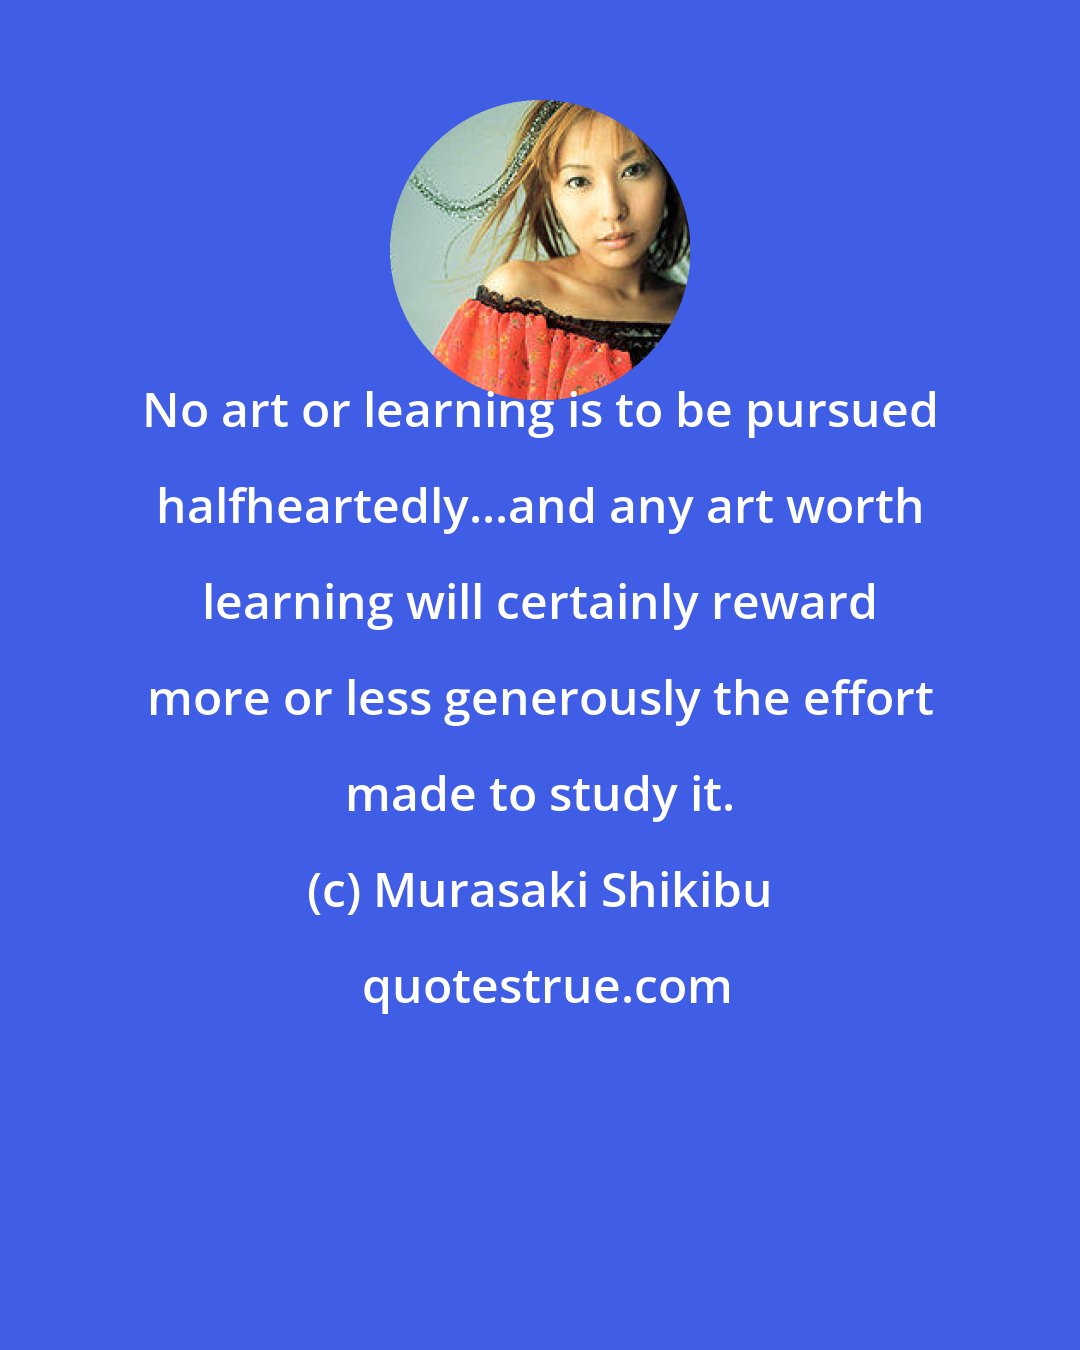 Murasaki Shikibu: No art or learning is to be pursued halfheartedly...and any art worth learning will certainly reward more or less generously the effort made to study it.